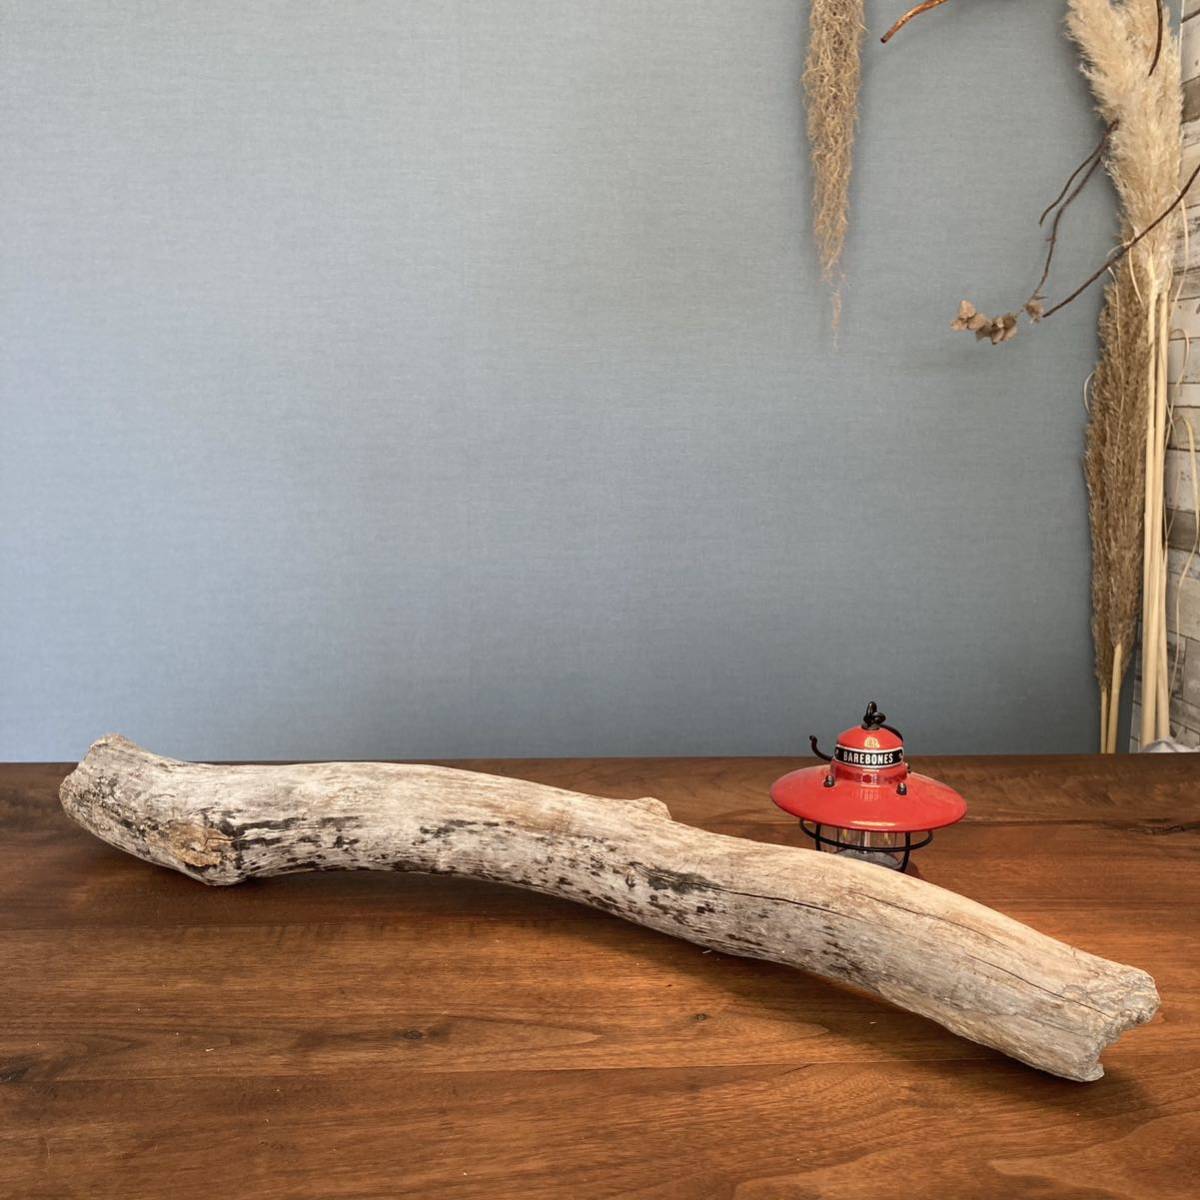 12. The old man who is the owner of the house Driftwood...natural product, interior, object, handmade works, interior, miscellaneous goods, ornament, object